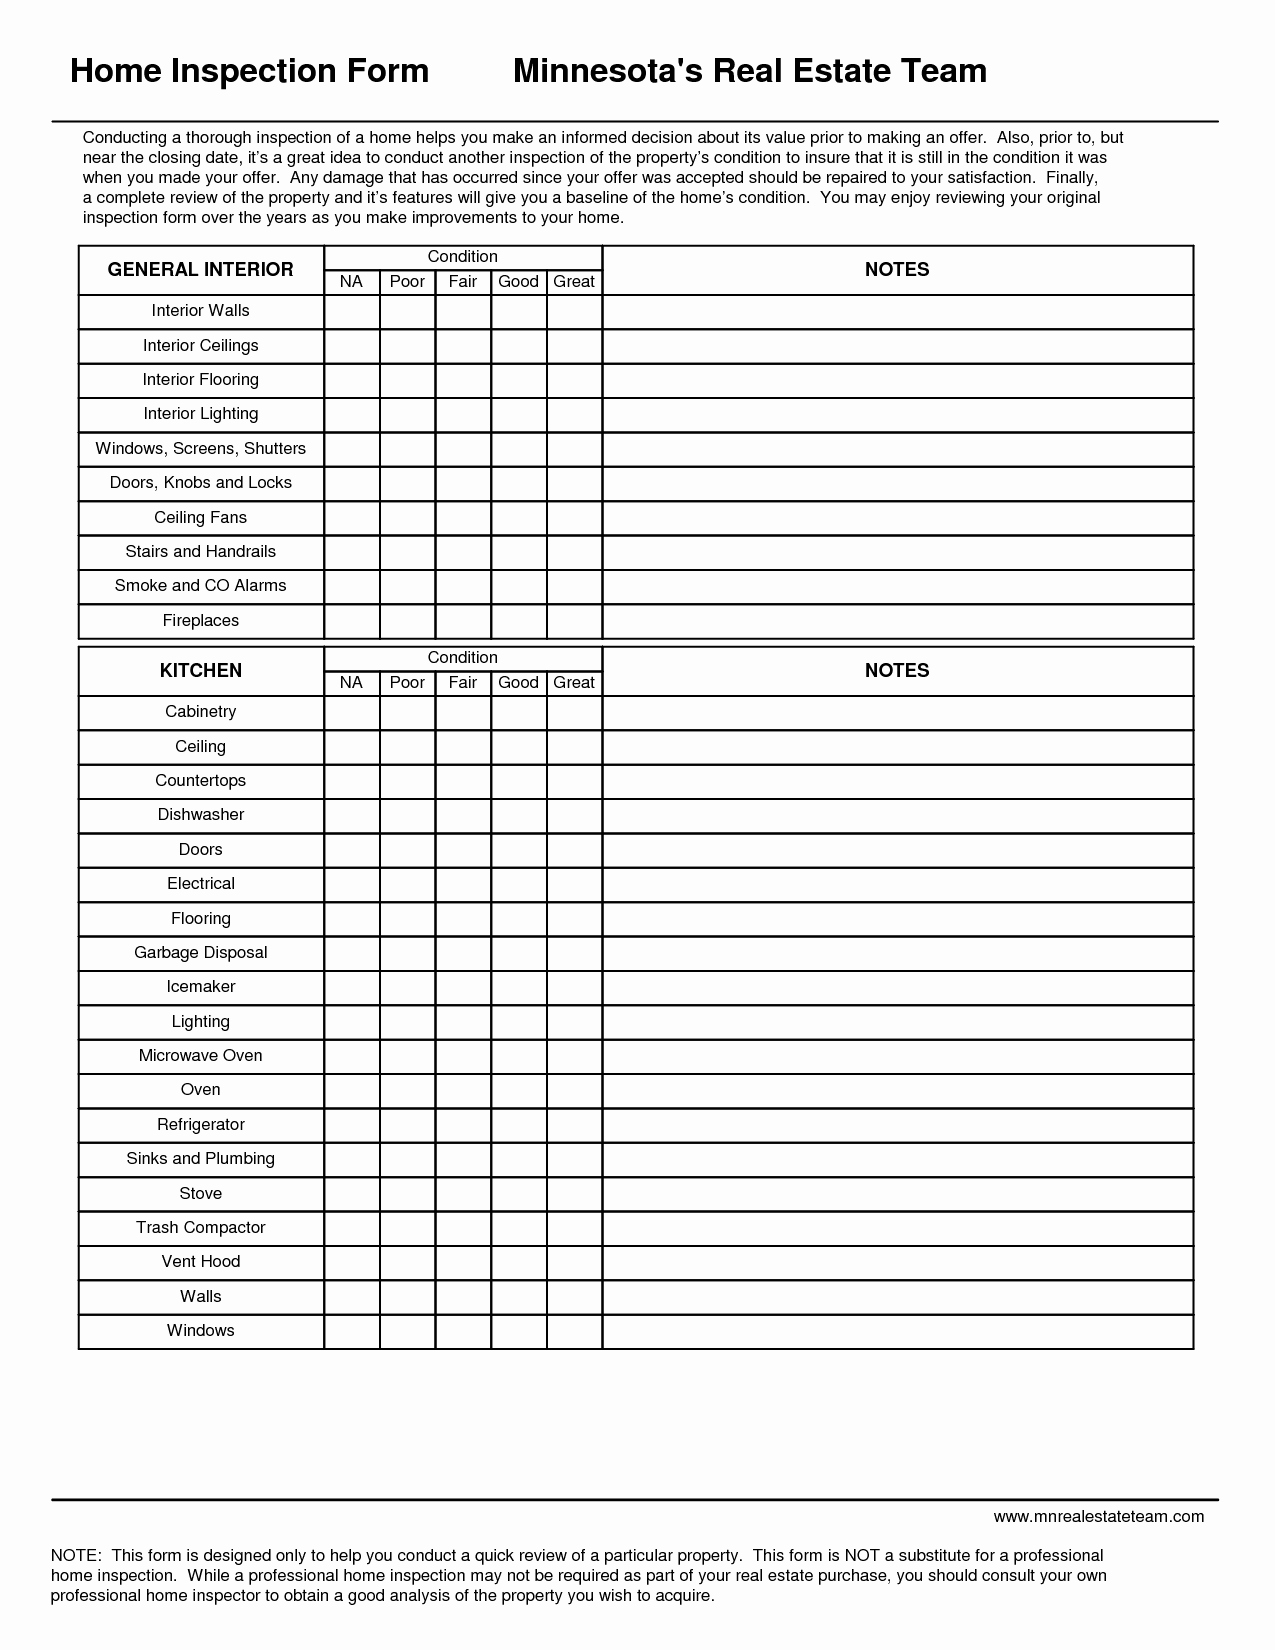 Home Inspection Report Template Beautiful 28 Of Home Inspection Spreadsheet Template